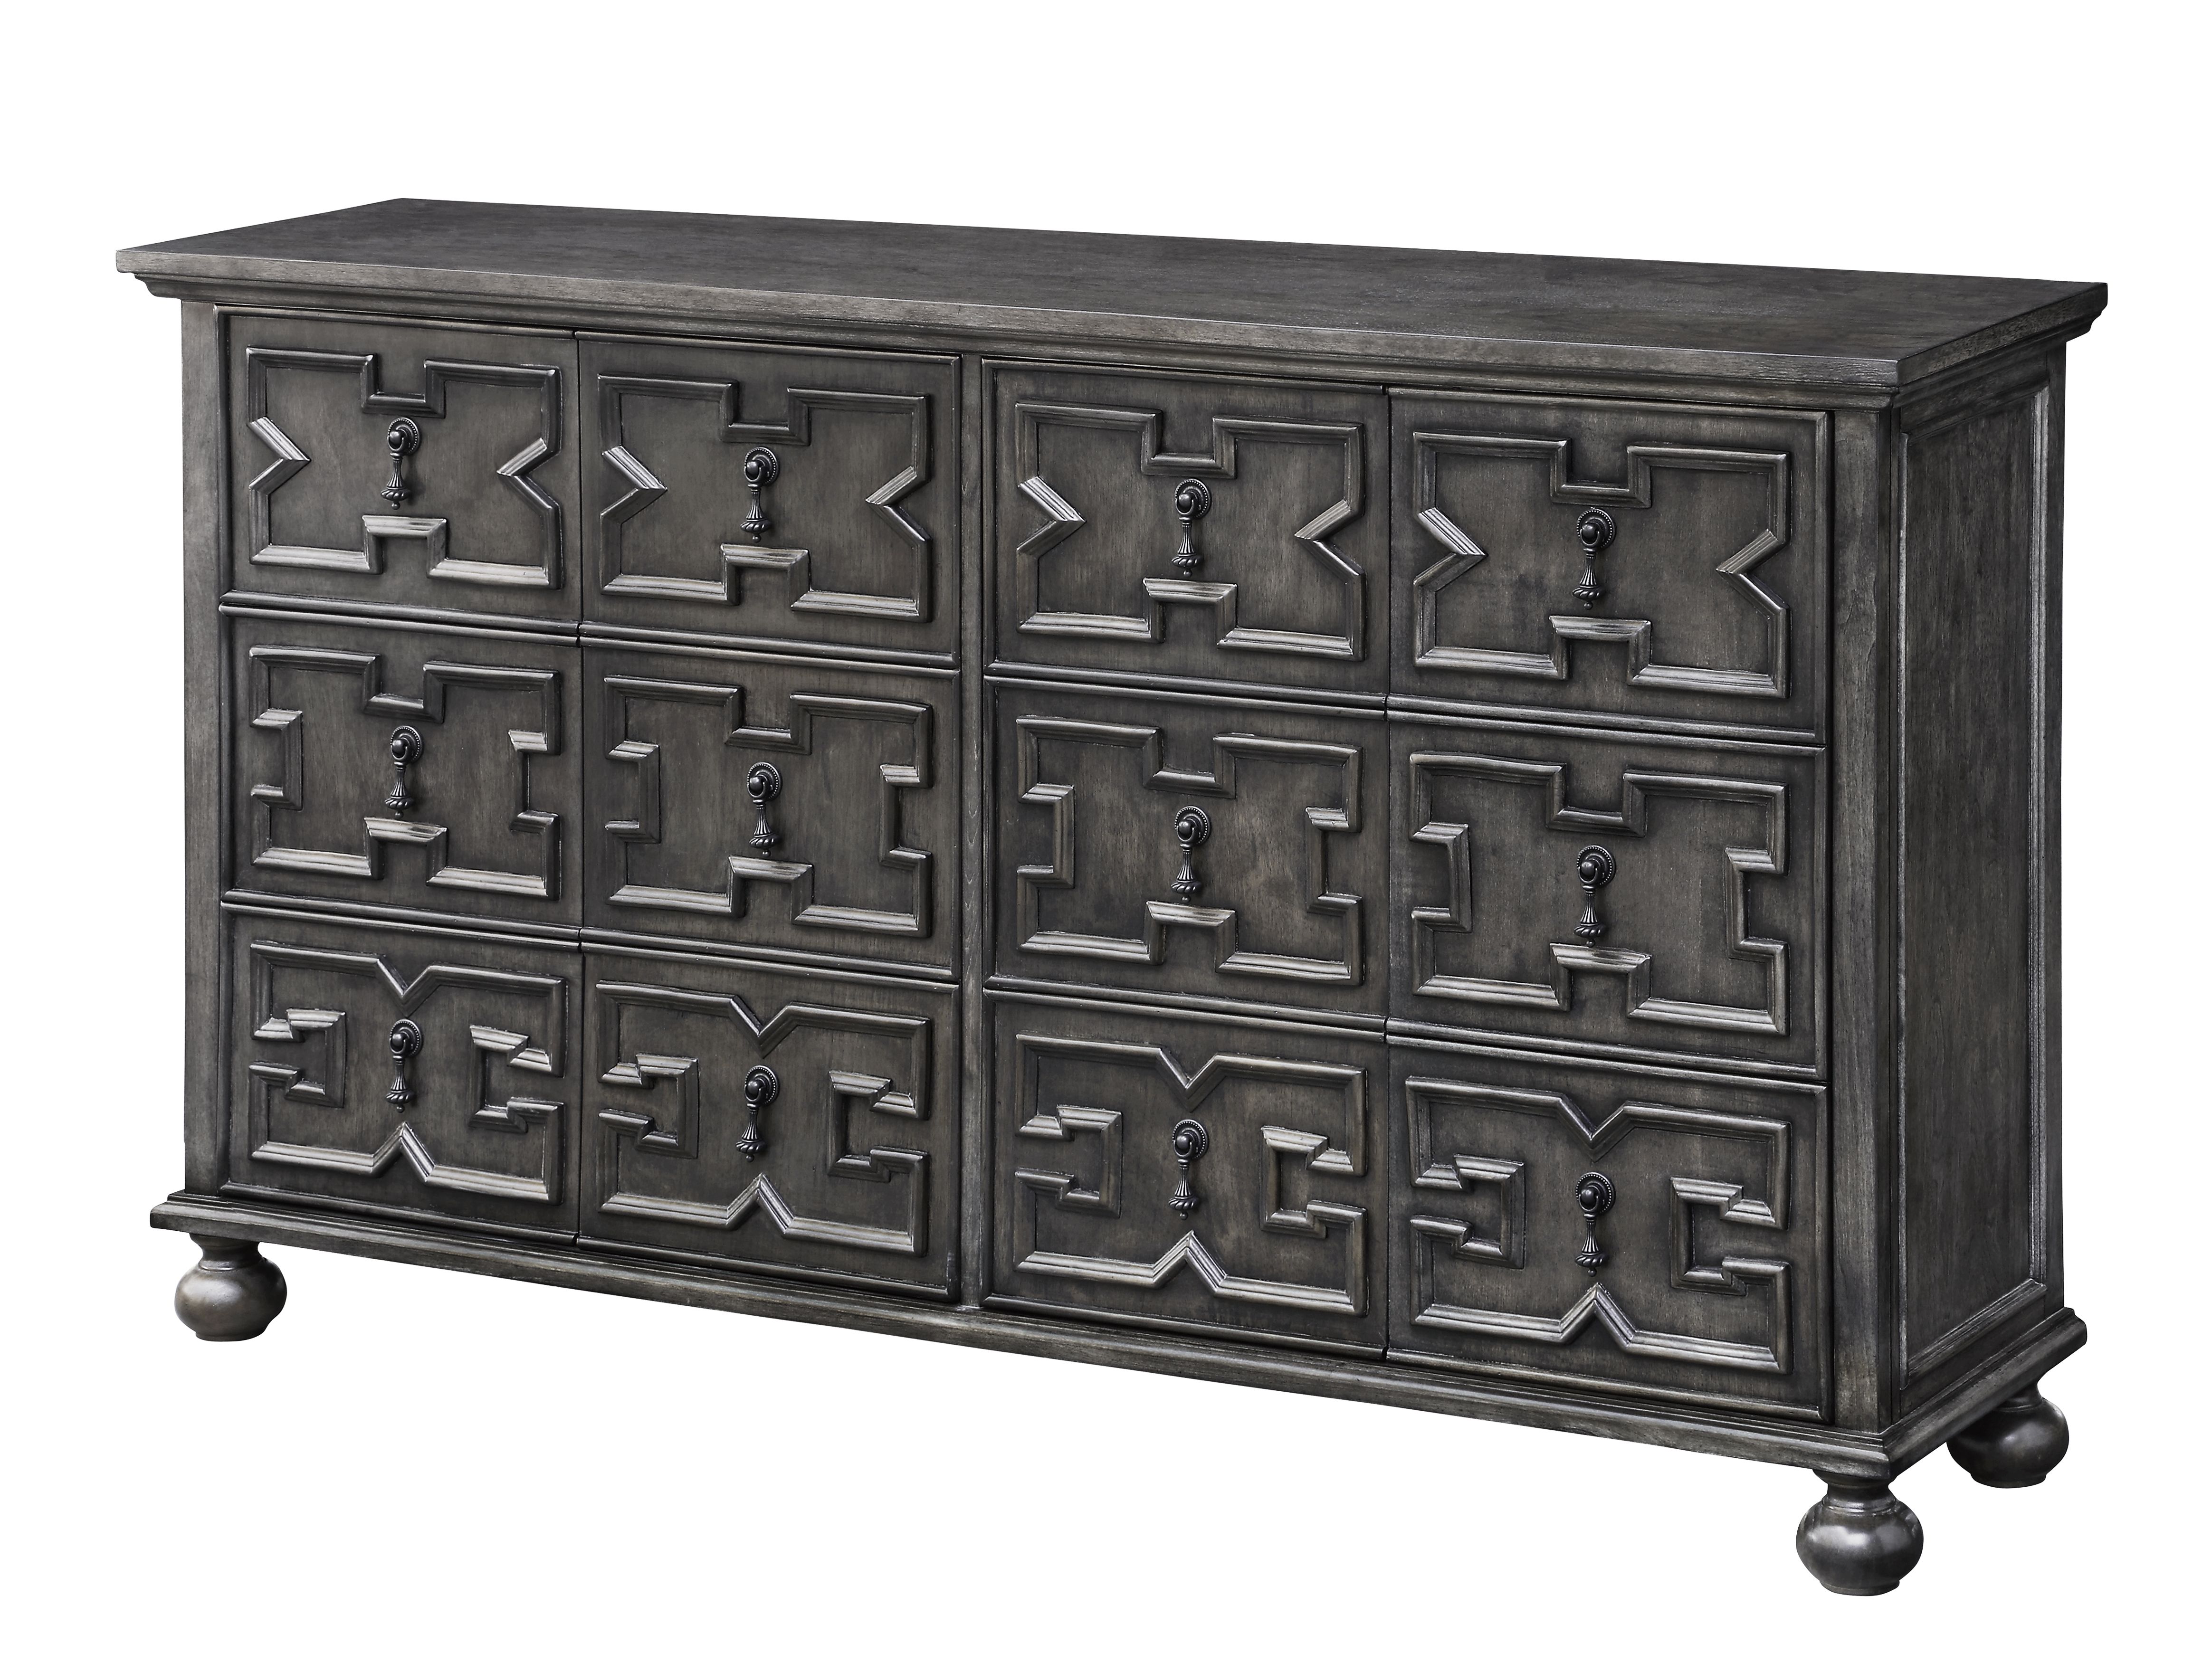 Rutledge Antique Grey 4 Door Pattern Front Sideboard Within Most Recently Released Rutledge Sideboards (View 3 of 20)